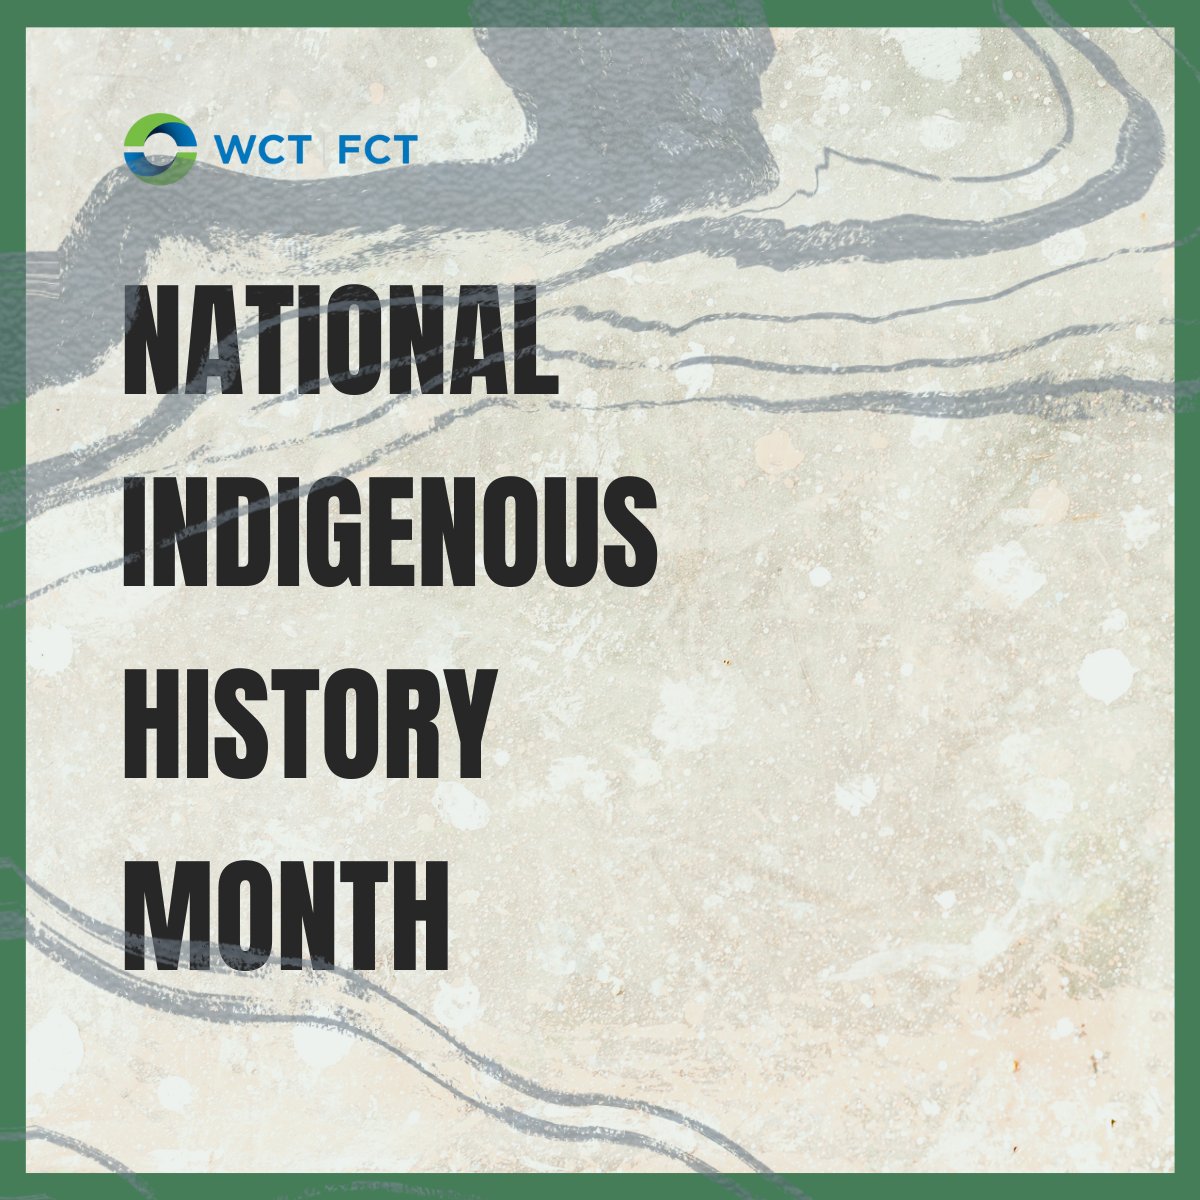 It's National Indigenous History Month! But remember, our journey toward reconciliation doesn't stop in June. Let's keep the dialogue open, continue learning, and engage with Indigenous communities throughout the year.